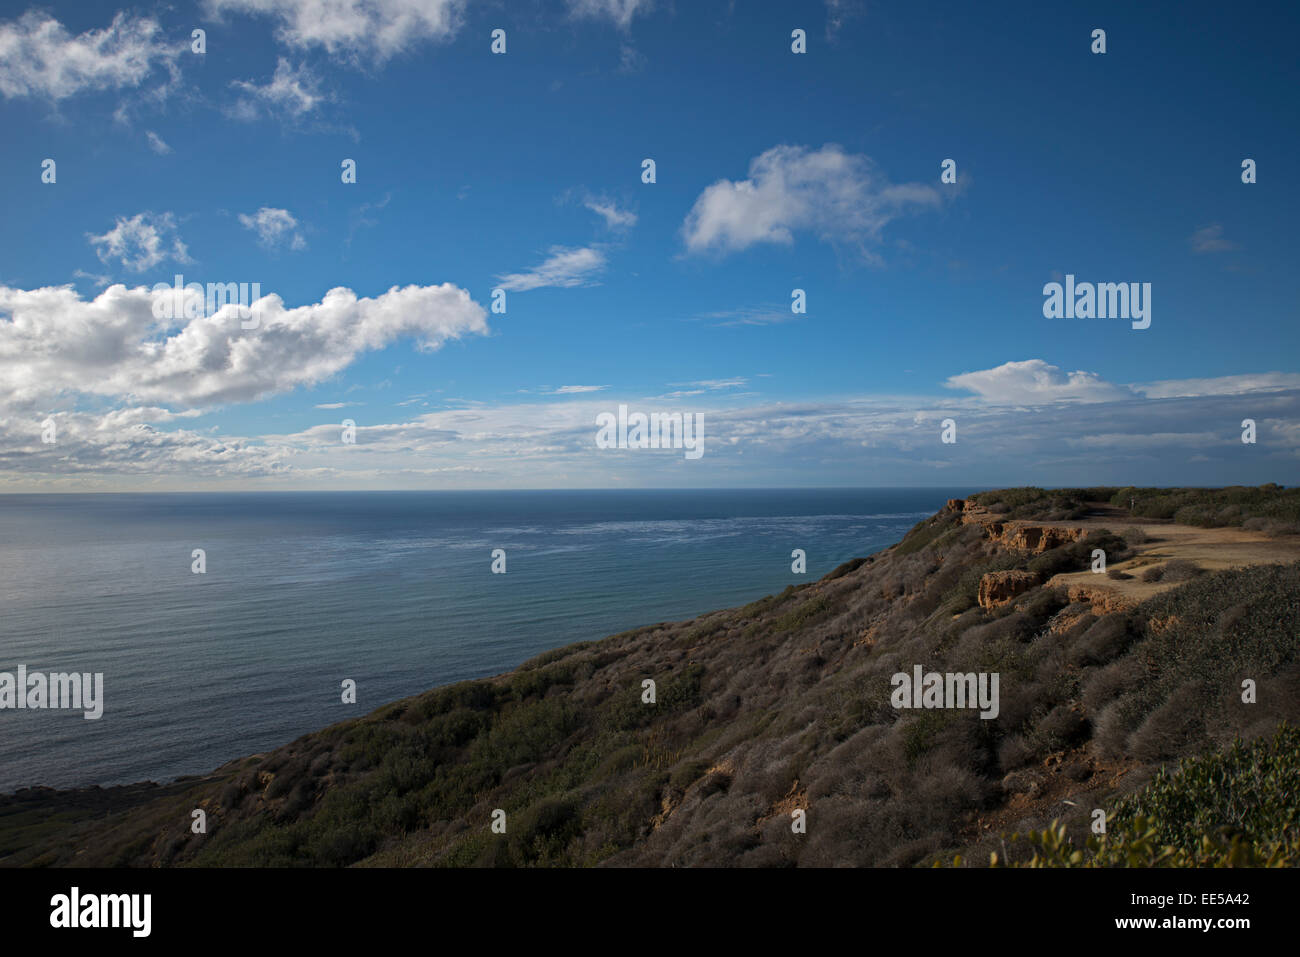 View of Pacific Ocean from Cabrillo National Monument, Point Loma, San Diego, California USA Stock Photo